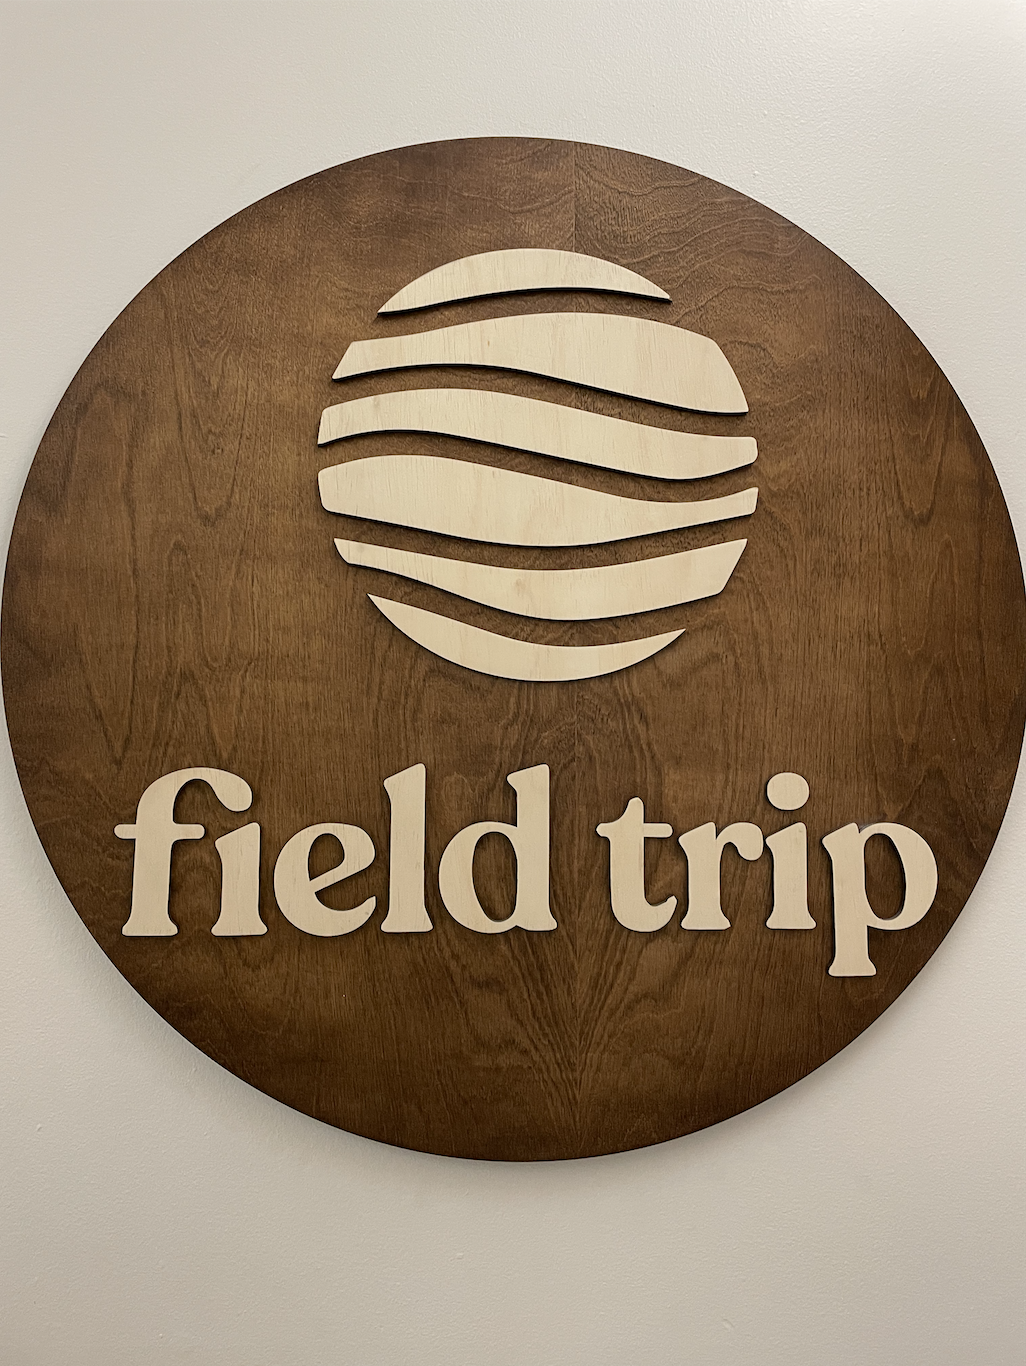 An image of the Field Trip logo